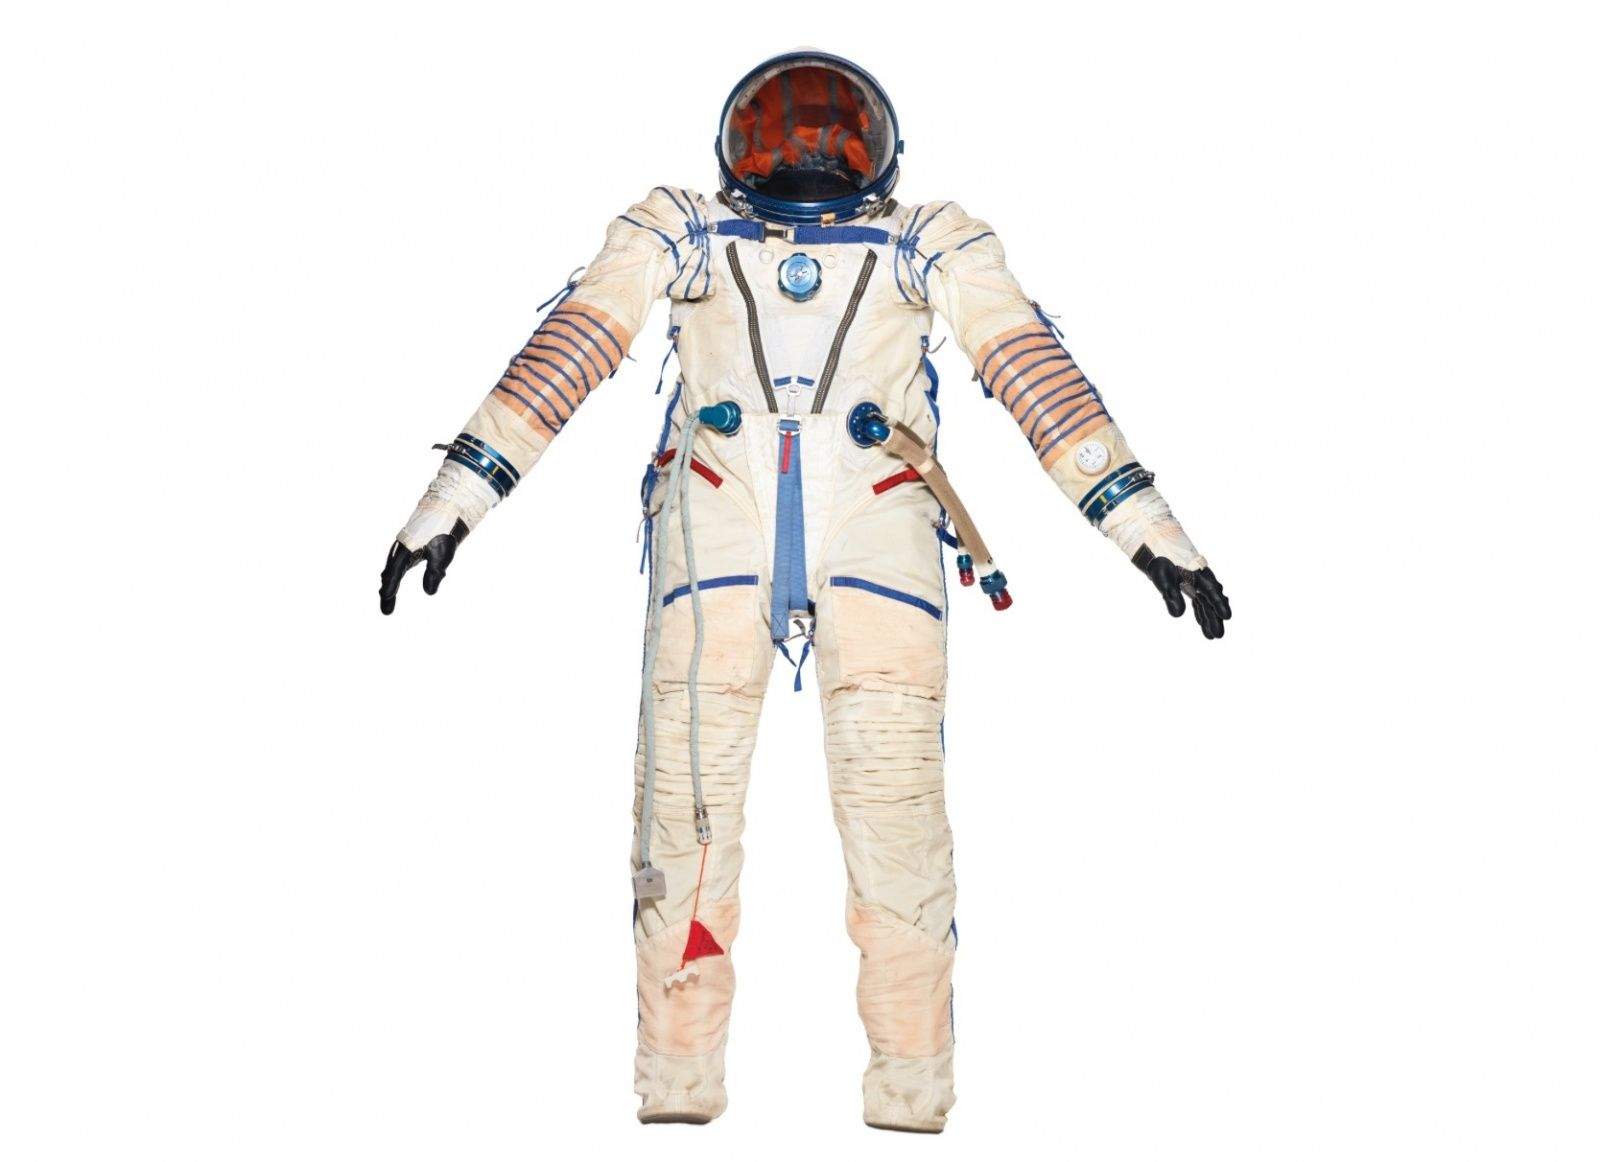 What would a Jony Ive spacesuit look like? Photo: Sotheby's